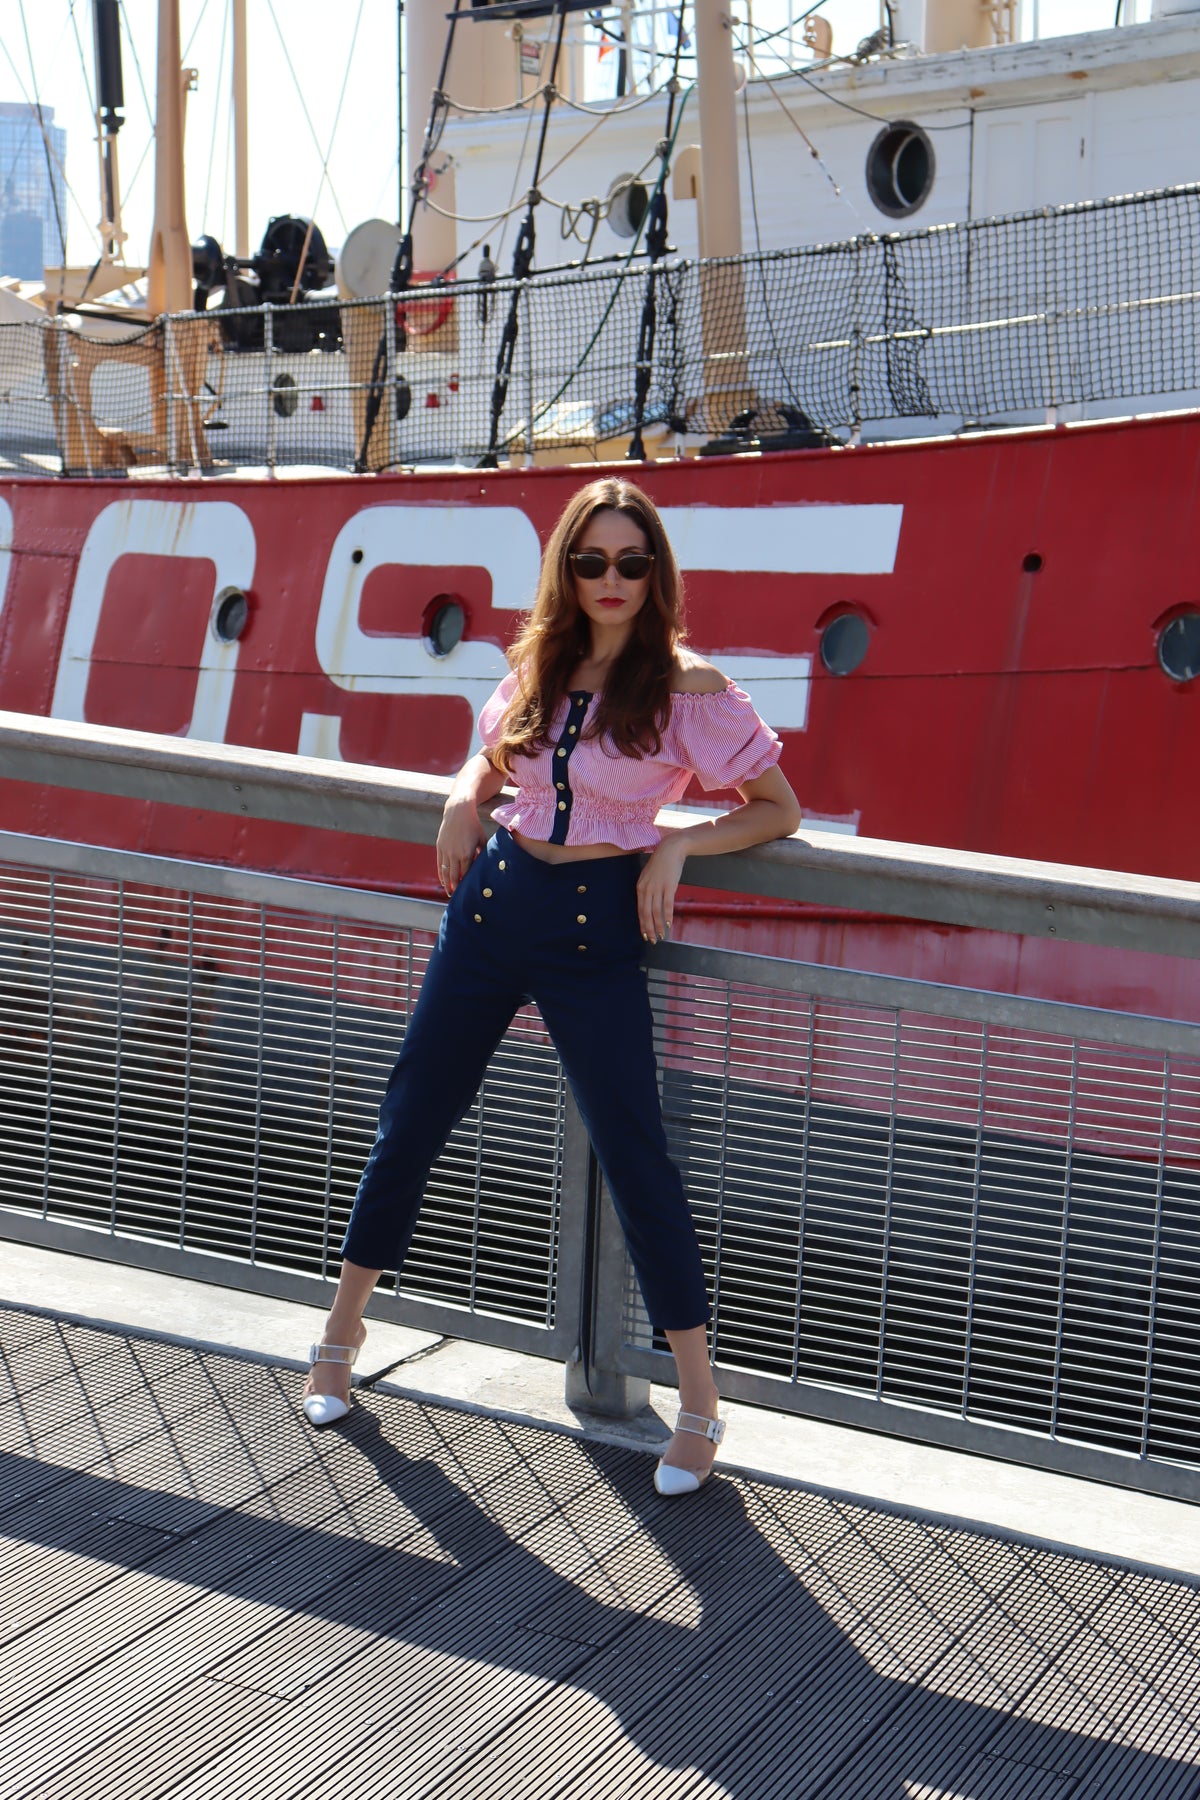 Model wearing jib top and navy cotton port capris leaning against a railing in front of a red boat.